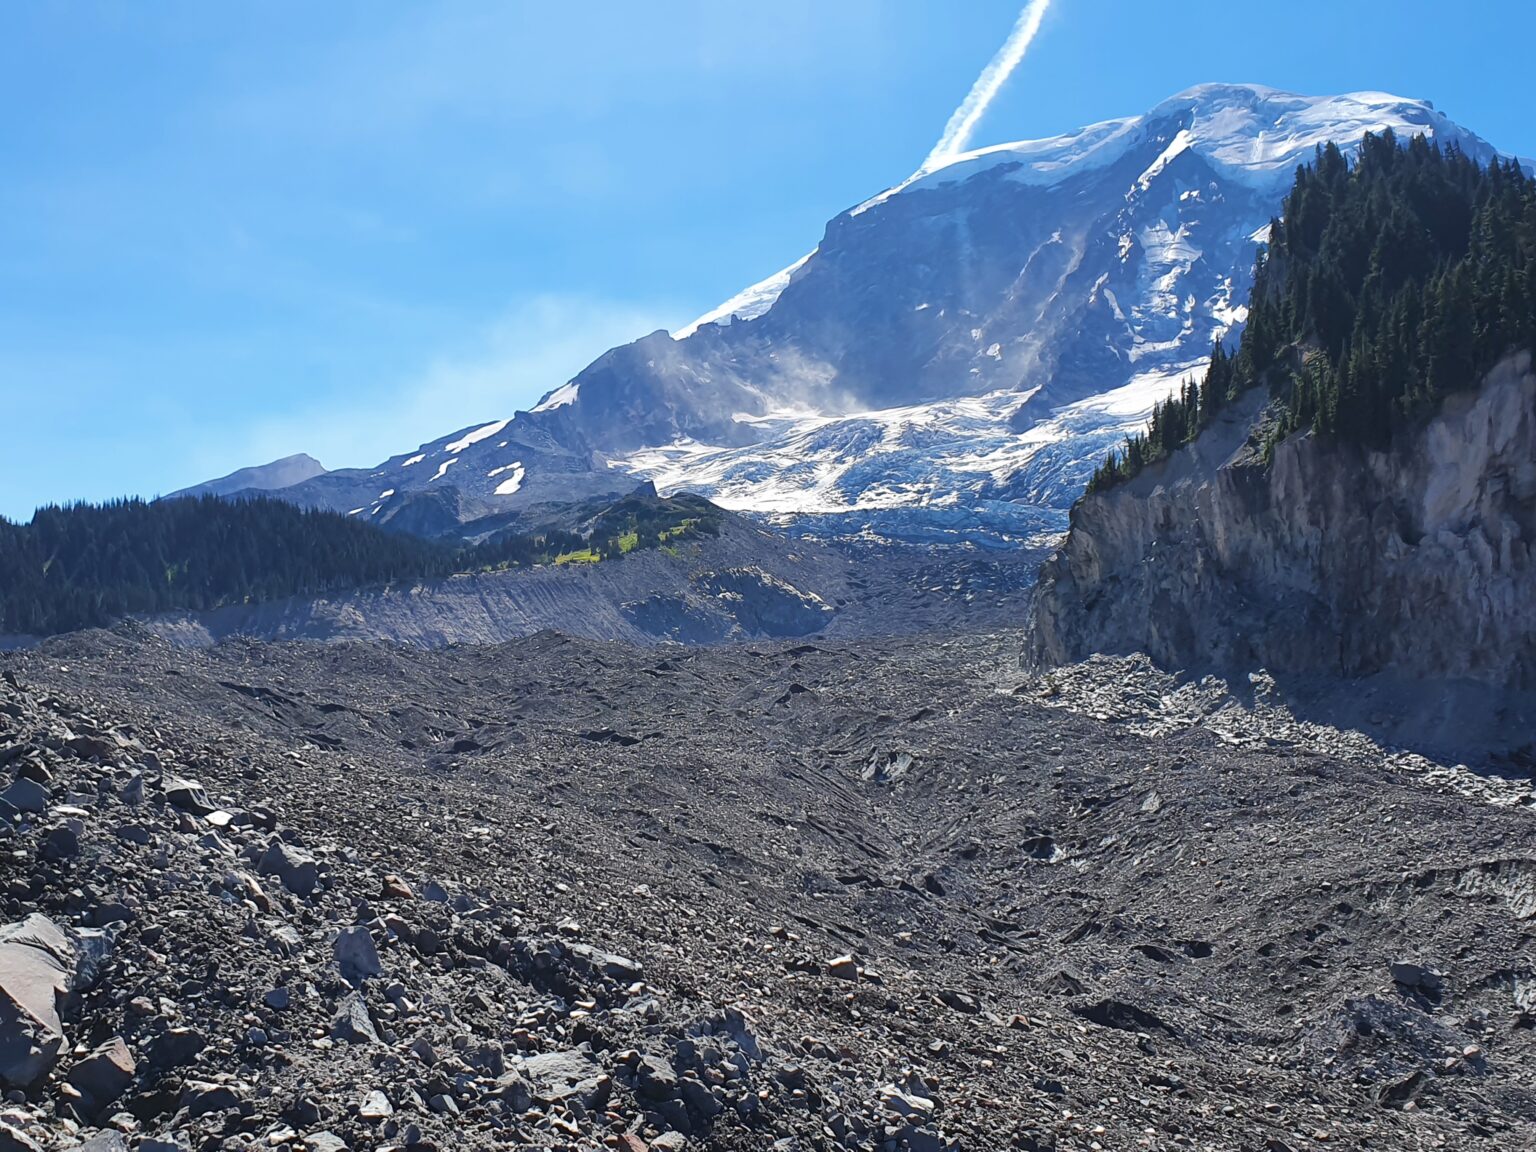 Looking back up the Carbon Glacier as we hike among the boulders